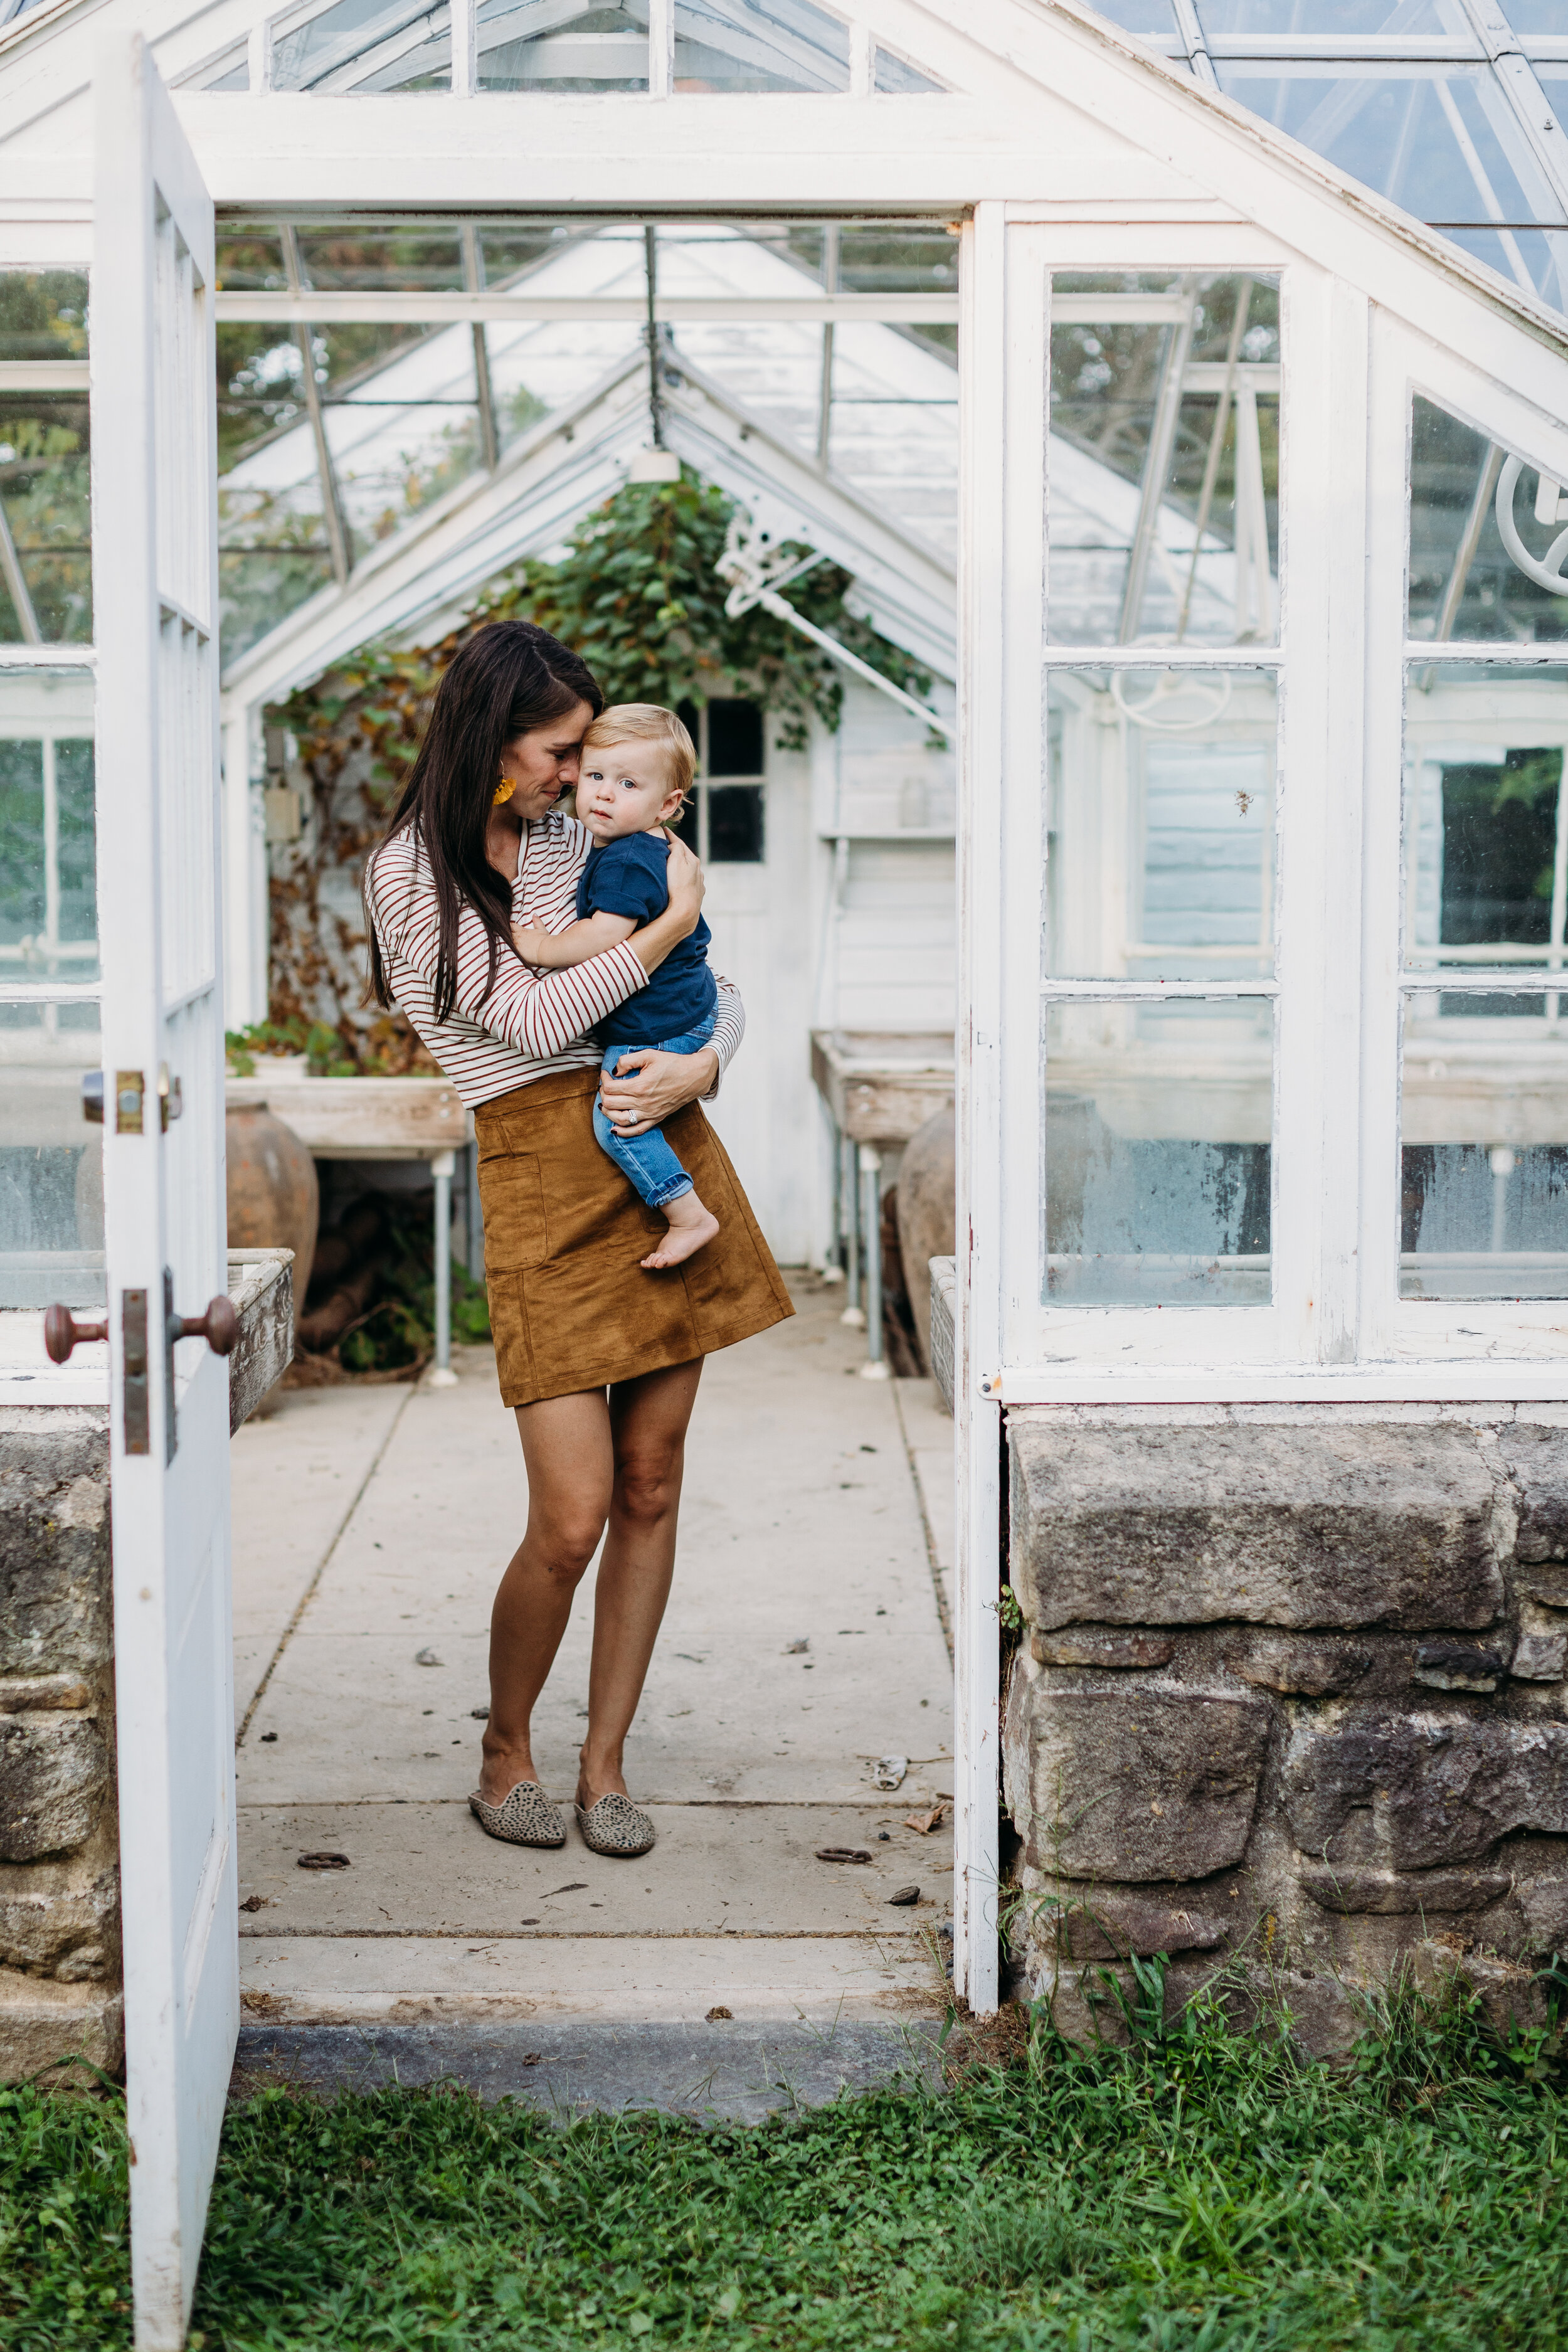 Highlands Mansion and Greenhouse Photographers _ Desiree Hoelzle Photography